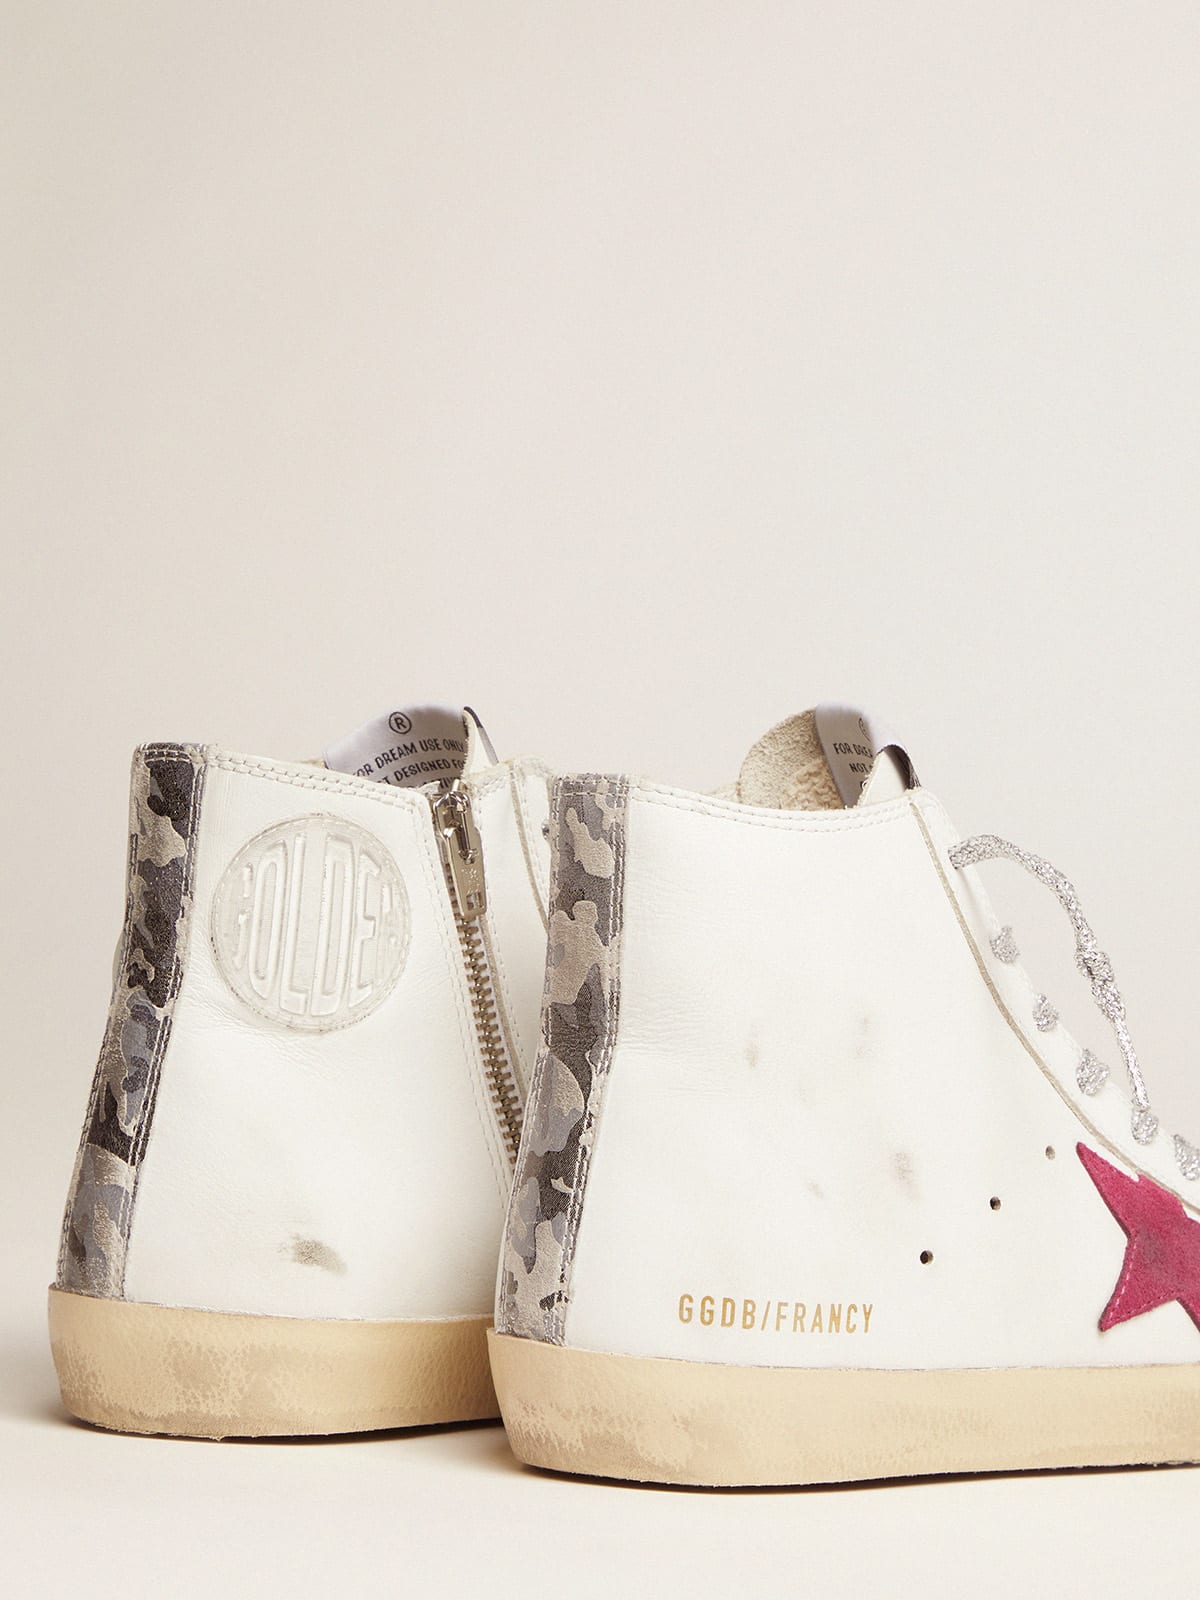 Golden Goose - Francy sneakers with red star and camouflage insert in 